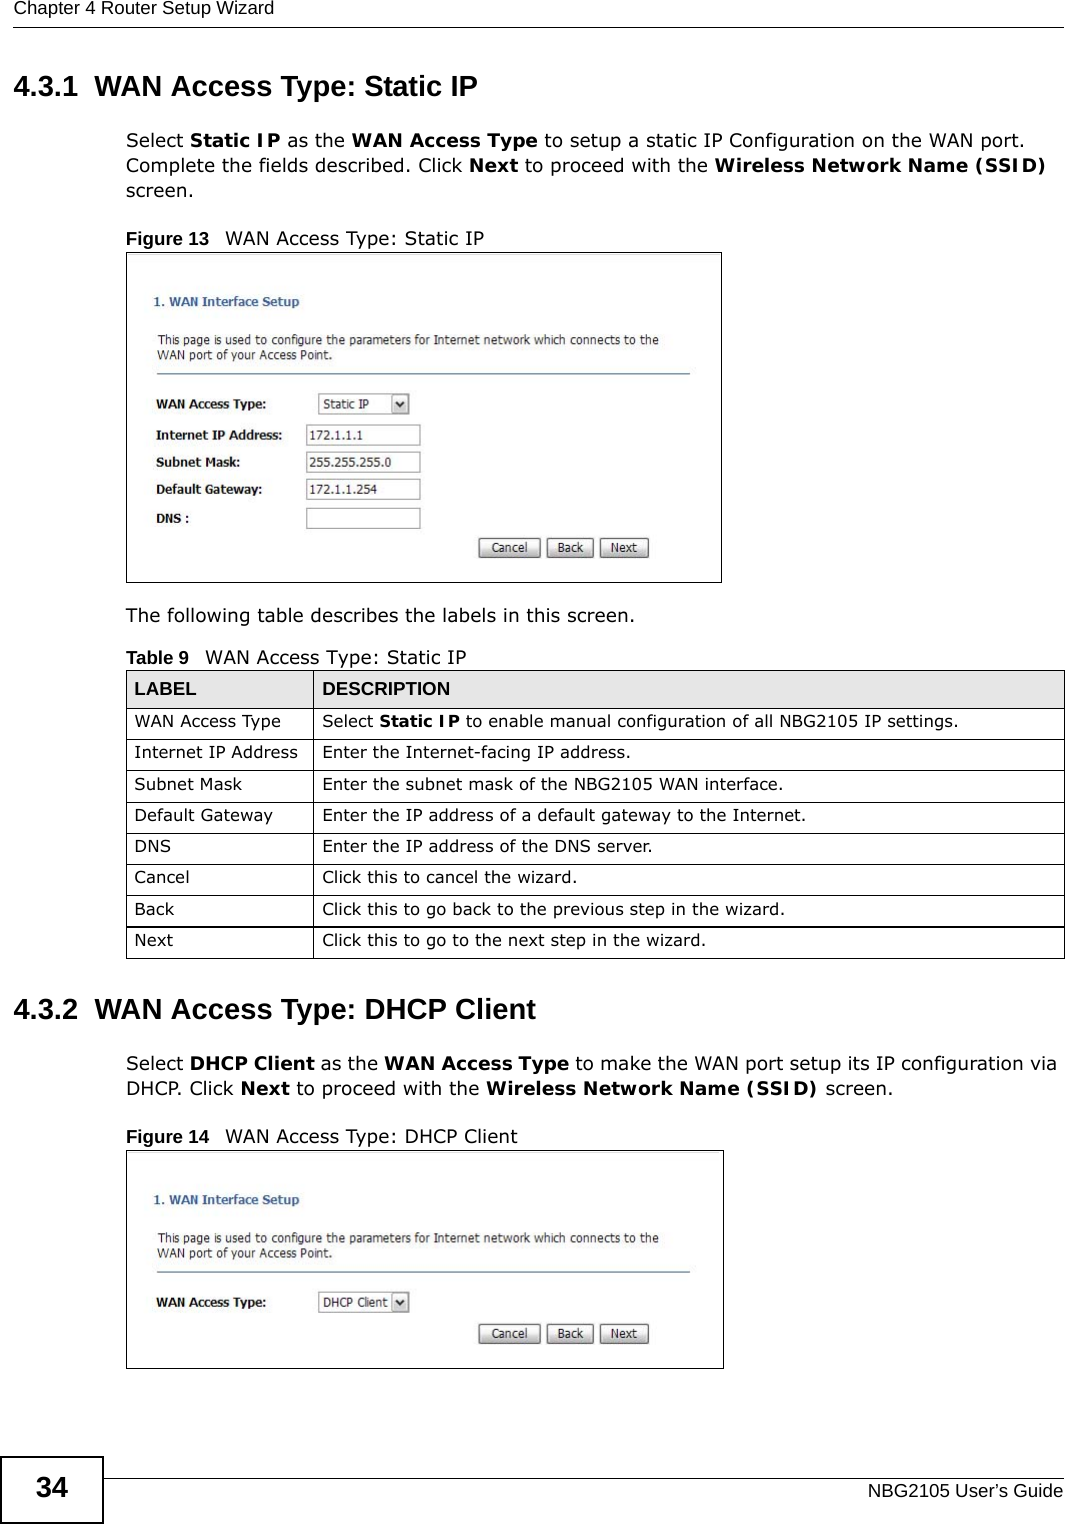 Chapter 4 Router Setup WizardNBG2105 User’s Guide344.3.1  WAN Access Type: Static IPSelect Static IP as the WAN Access Type to setup a static IP Configuration on the WAN port. Complete the fields described. Click Next to proceed with the Wireless Network Name (SSID) screen.Figure 13   WAN Access Type: Static IP The following table describes the labels in this screen.4.3.2  WAN Access Type: DHCP Client Select DHCP Client as the WAN Access Type to make the WAN port setup its IP configuration via DHCP. Click Next to proceed with the Wireless Network Name (SSID) screen.Figure 14   WAN Access Type: DHCP Client Table 9   WAN Access Type: Static IPLABEL DESCRIPTIONWAN Access Type Select Static IP to enable manual configuration of all NBG2105 IP settings.Internet IP Address Enter the Internet-facing IP address.Subnet Mask Enter the subnet mask of the NBG2105 WAN interface.Default Gateway Enter the IP address of a default gateway to the Internet.DNS Enter the IP address of the DNS server.Cancel Click this to cancel the wizard.Back Click this to go back to the previous step in the wizard.Next Click this to go to the next step in the wizard.